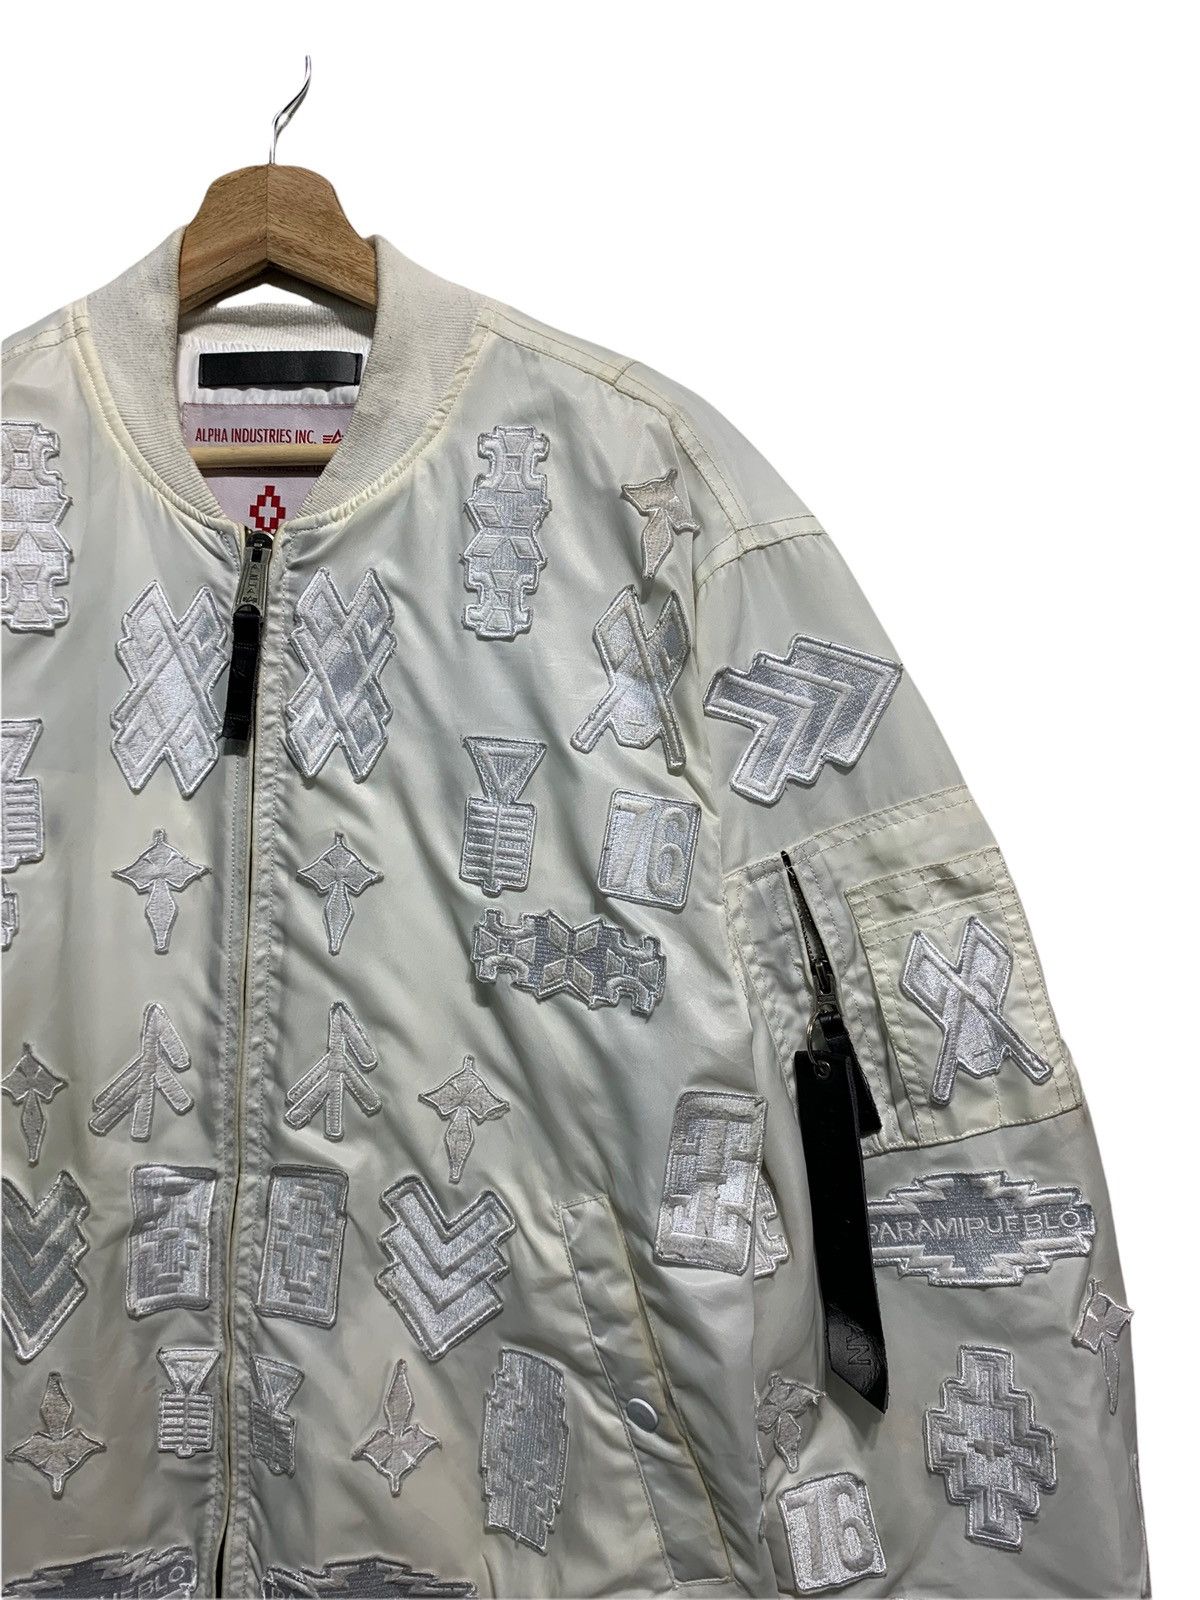 🔥MARCELO BURLON X ALPHA IND WHITE PATCHES EMBROIDERY JACKETS - 8